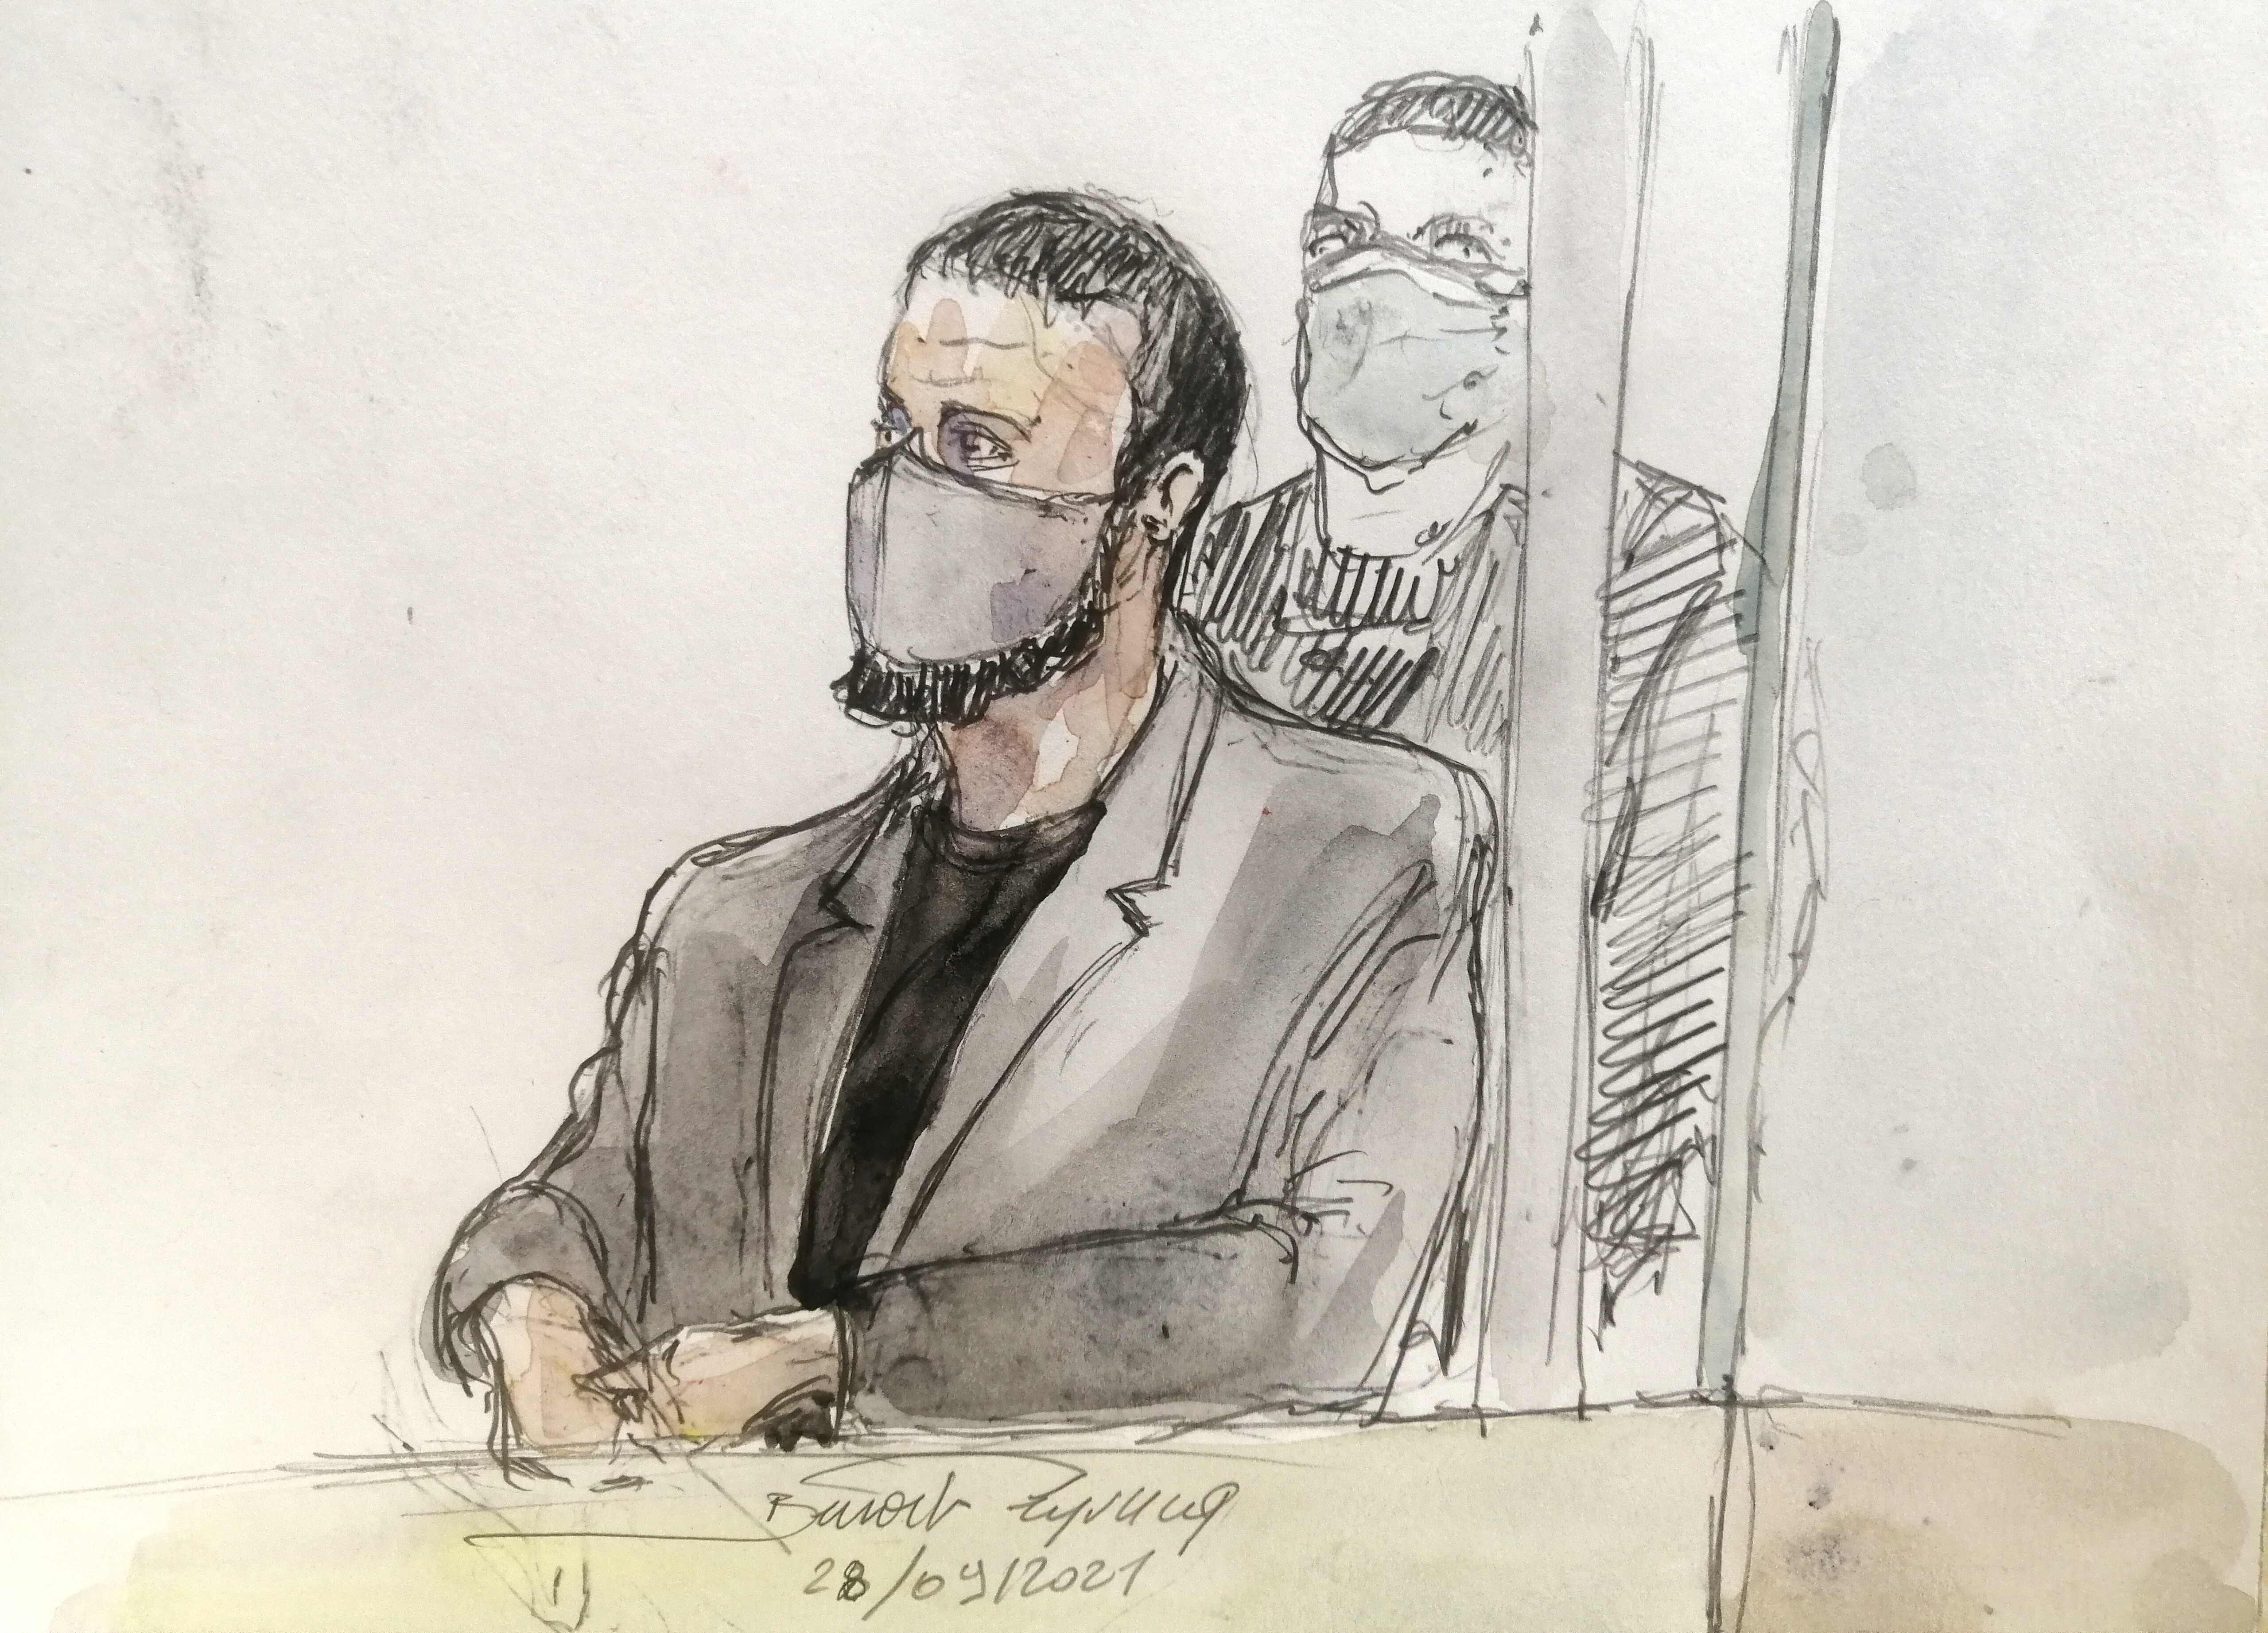 A court sketch shows Salah Abdeslam, the prime suspect in the 2015 Paris attacks, flanked by a policeman during the trial at the Palais de Justice of Paris on Tuesday. Photo: AFP